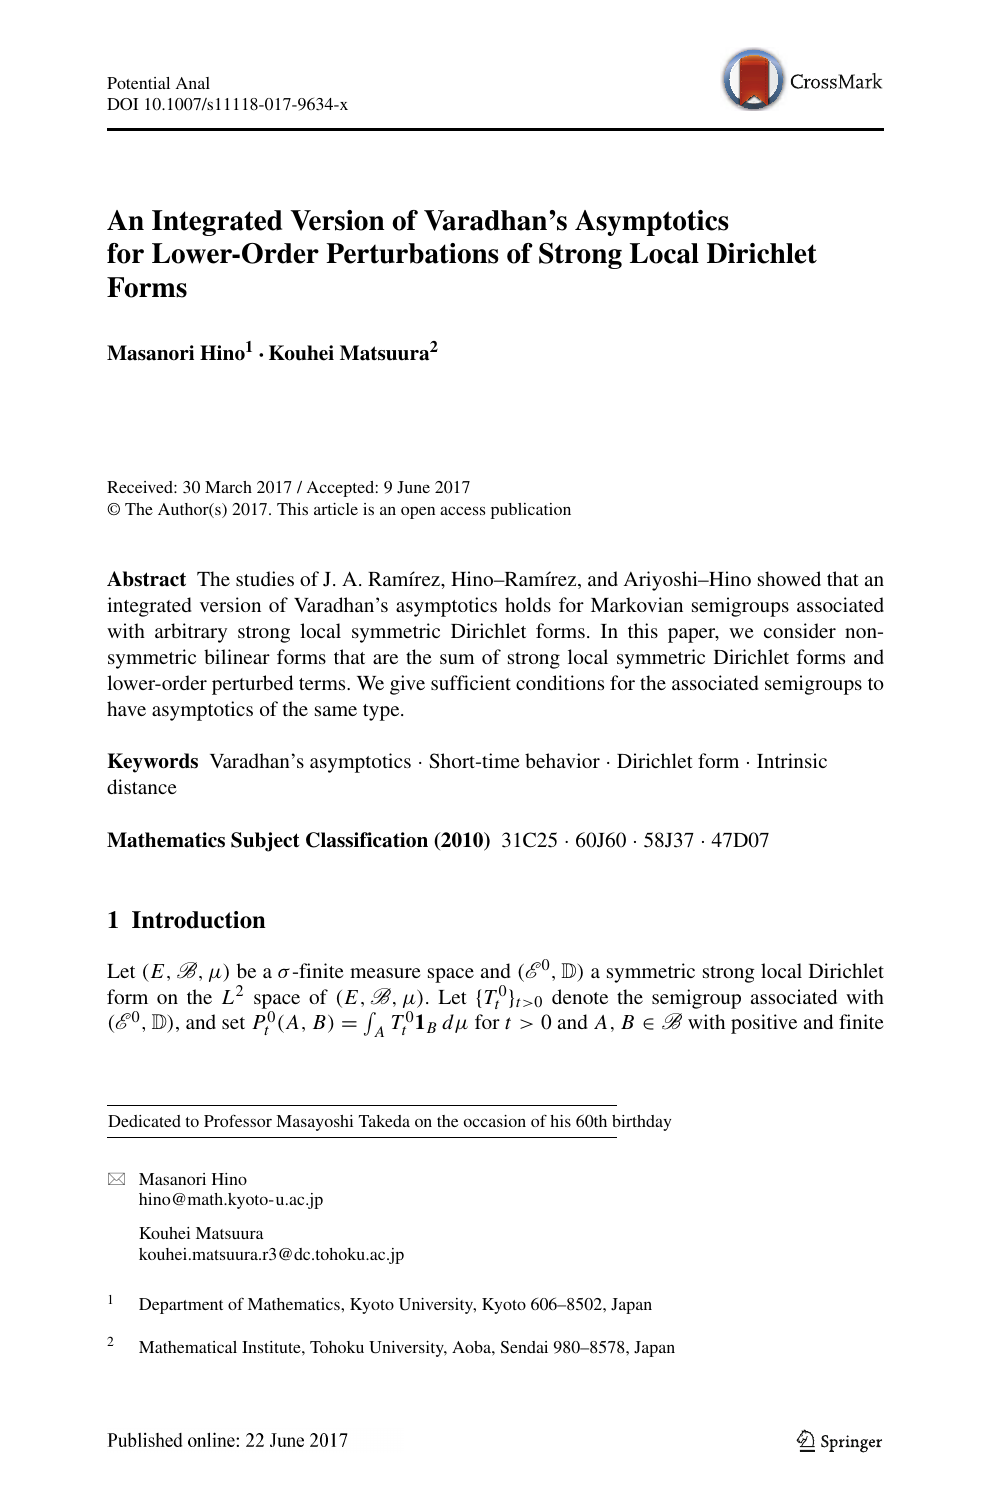 An Integrated Version Of Varadhan S Asymptotics For Lower Order Perturbations Of Strong Local Dirichlet Forms Topic Of Research Paper In Mathematics Download Scholarly Article Pdf And Read For Free On Cyberleninka Open